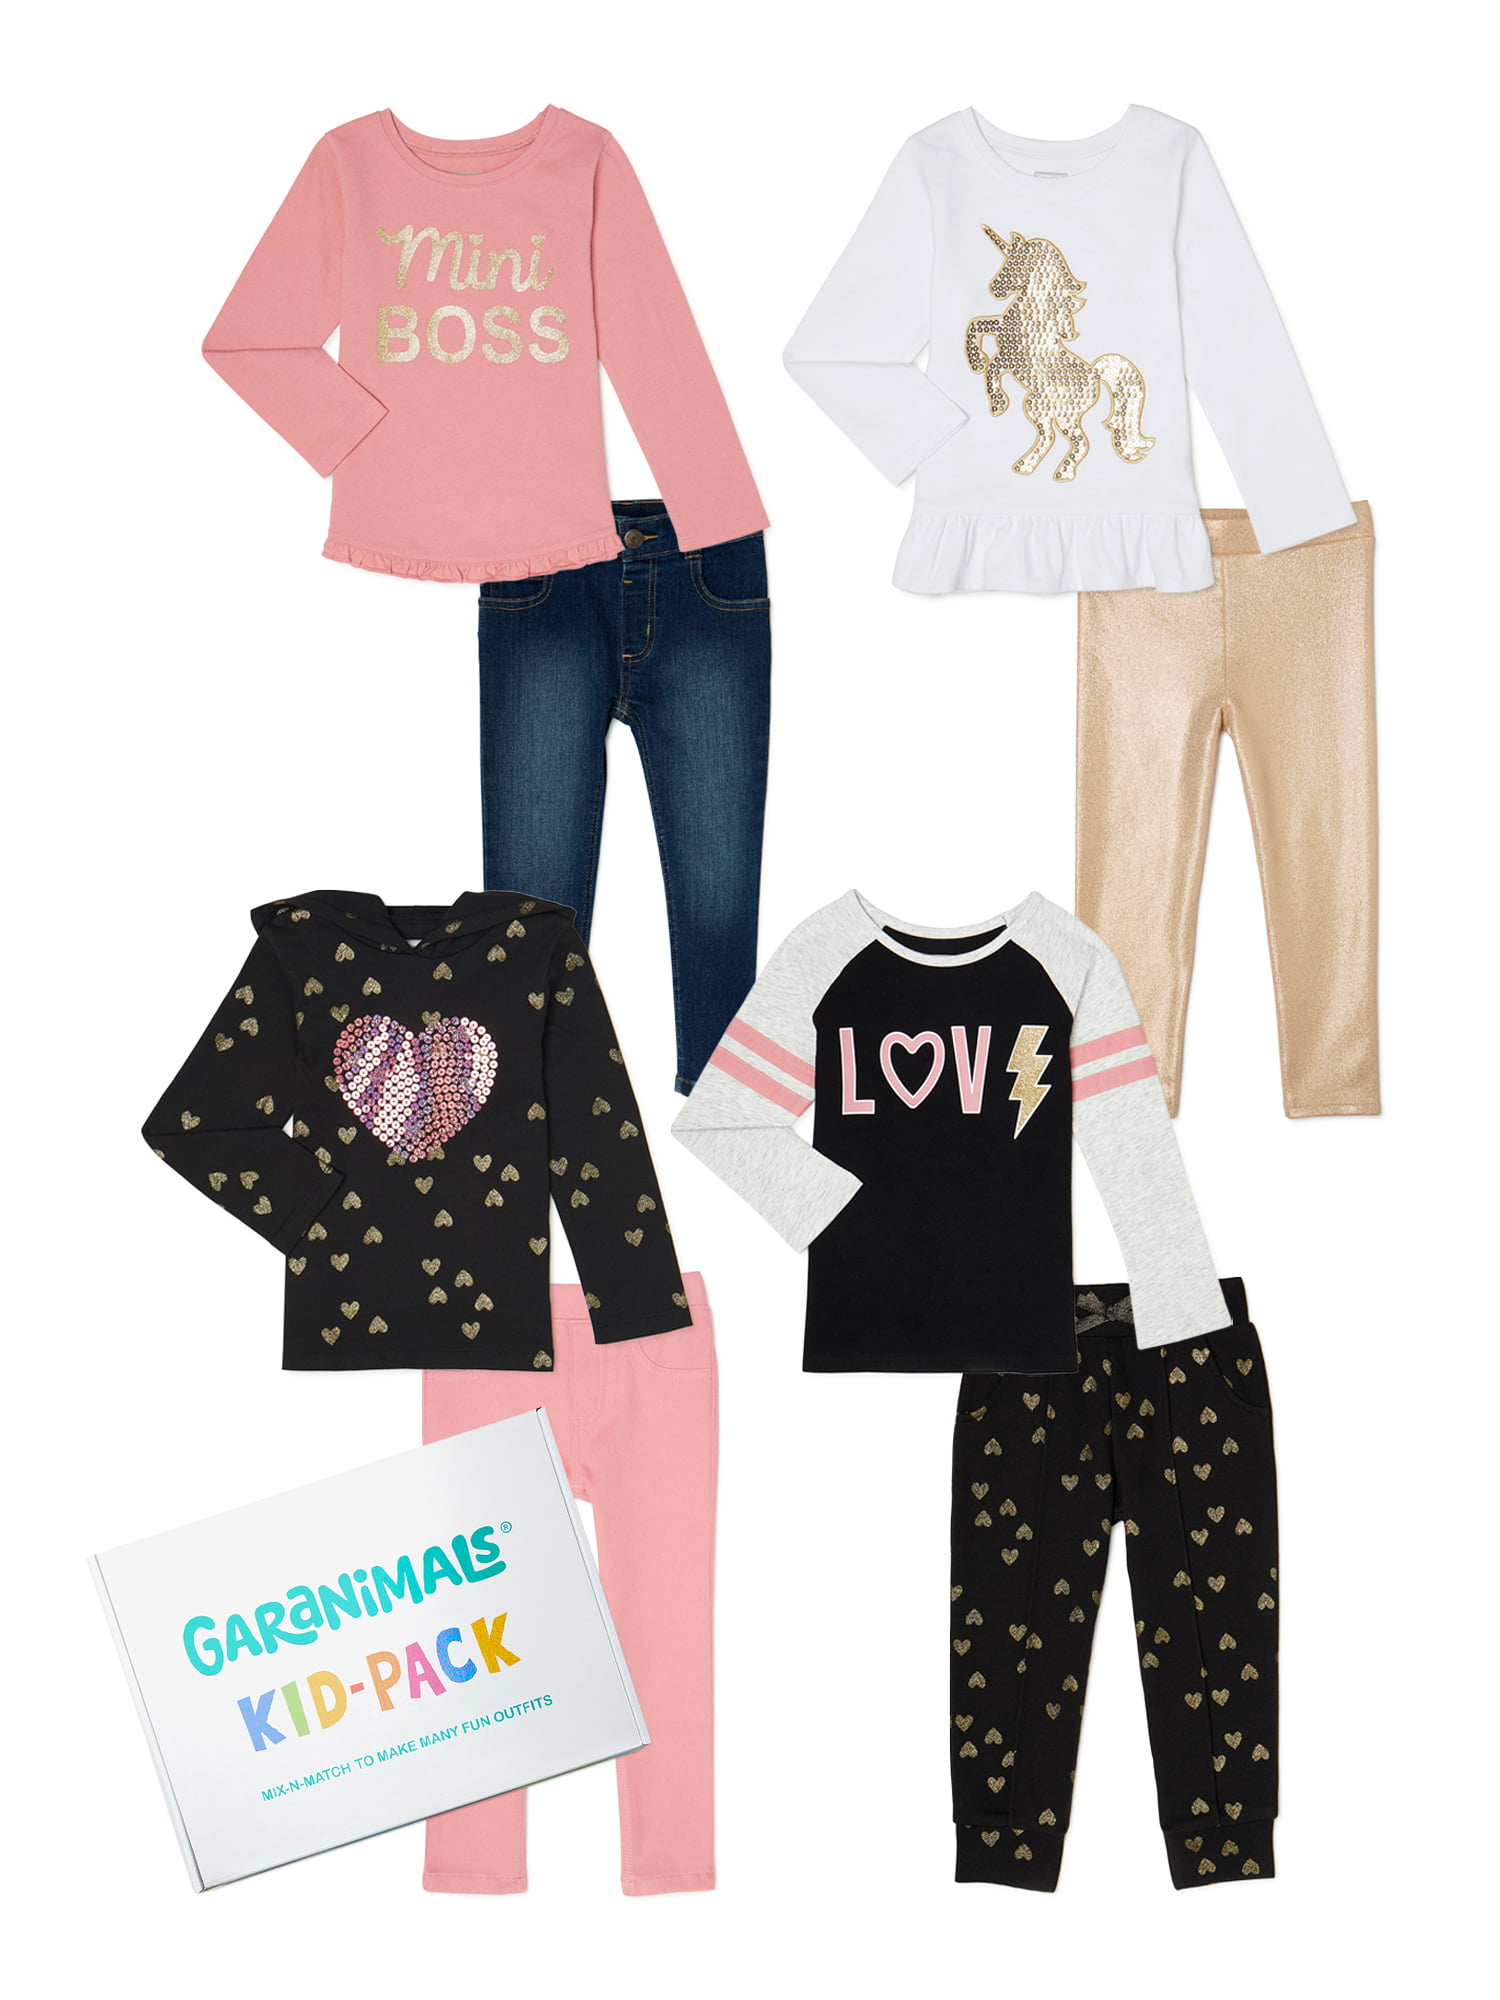 Match Outfits Kid-Pack Gift Box 